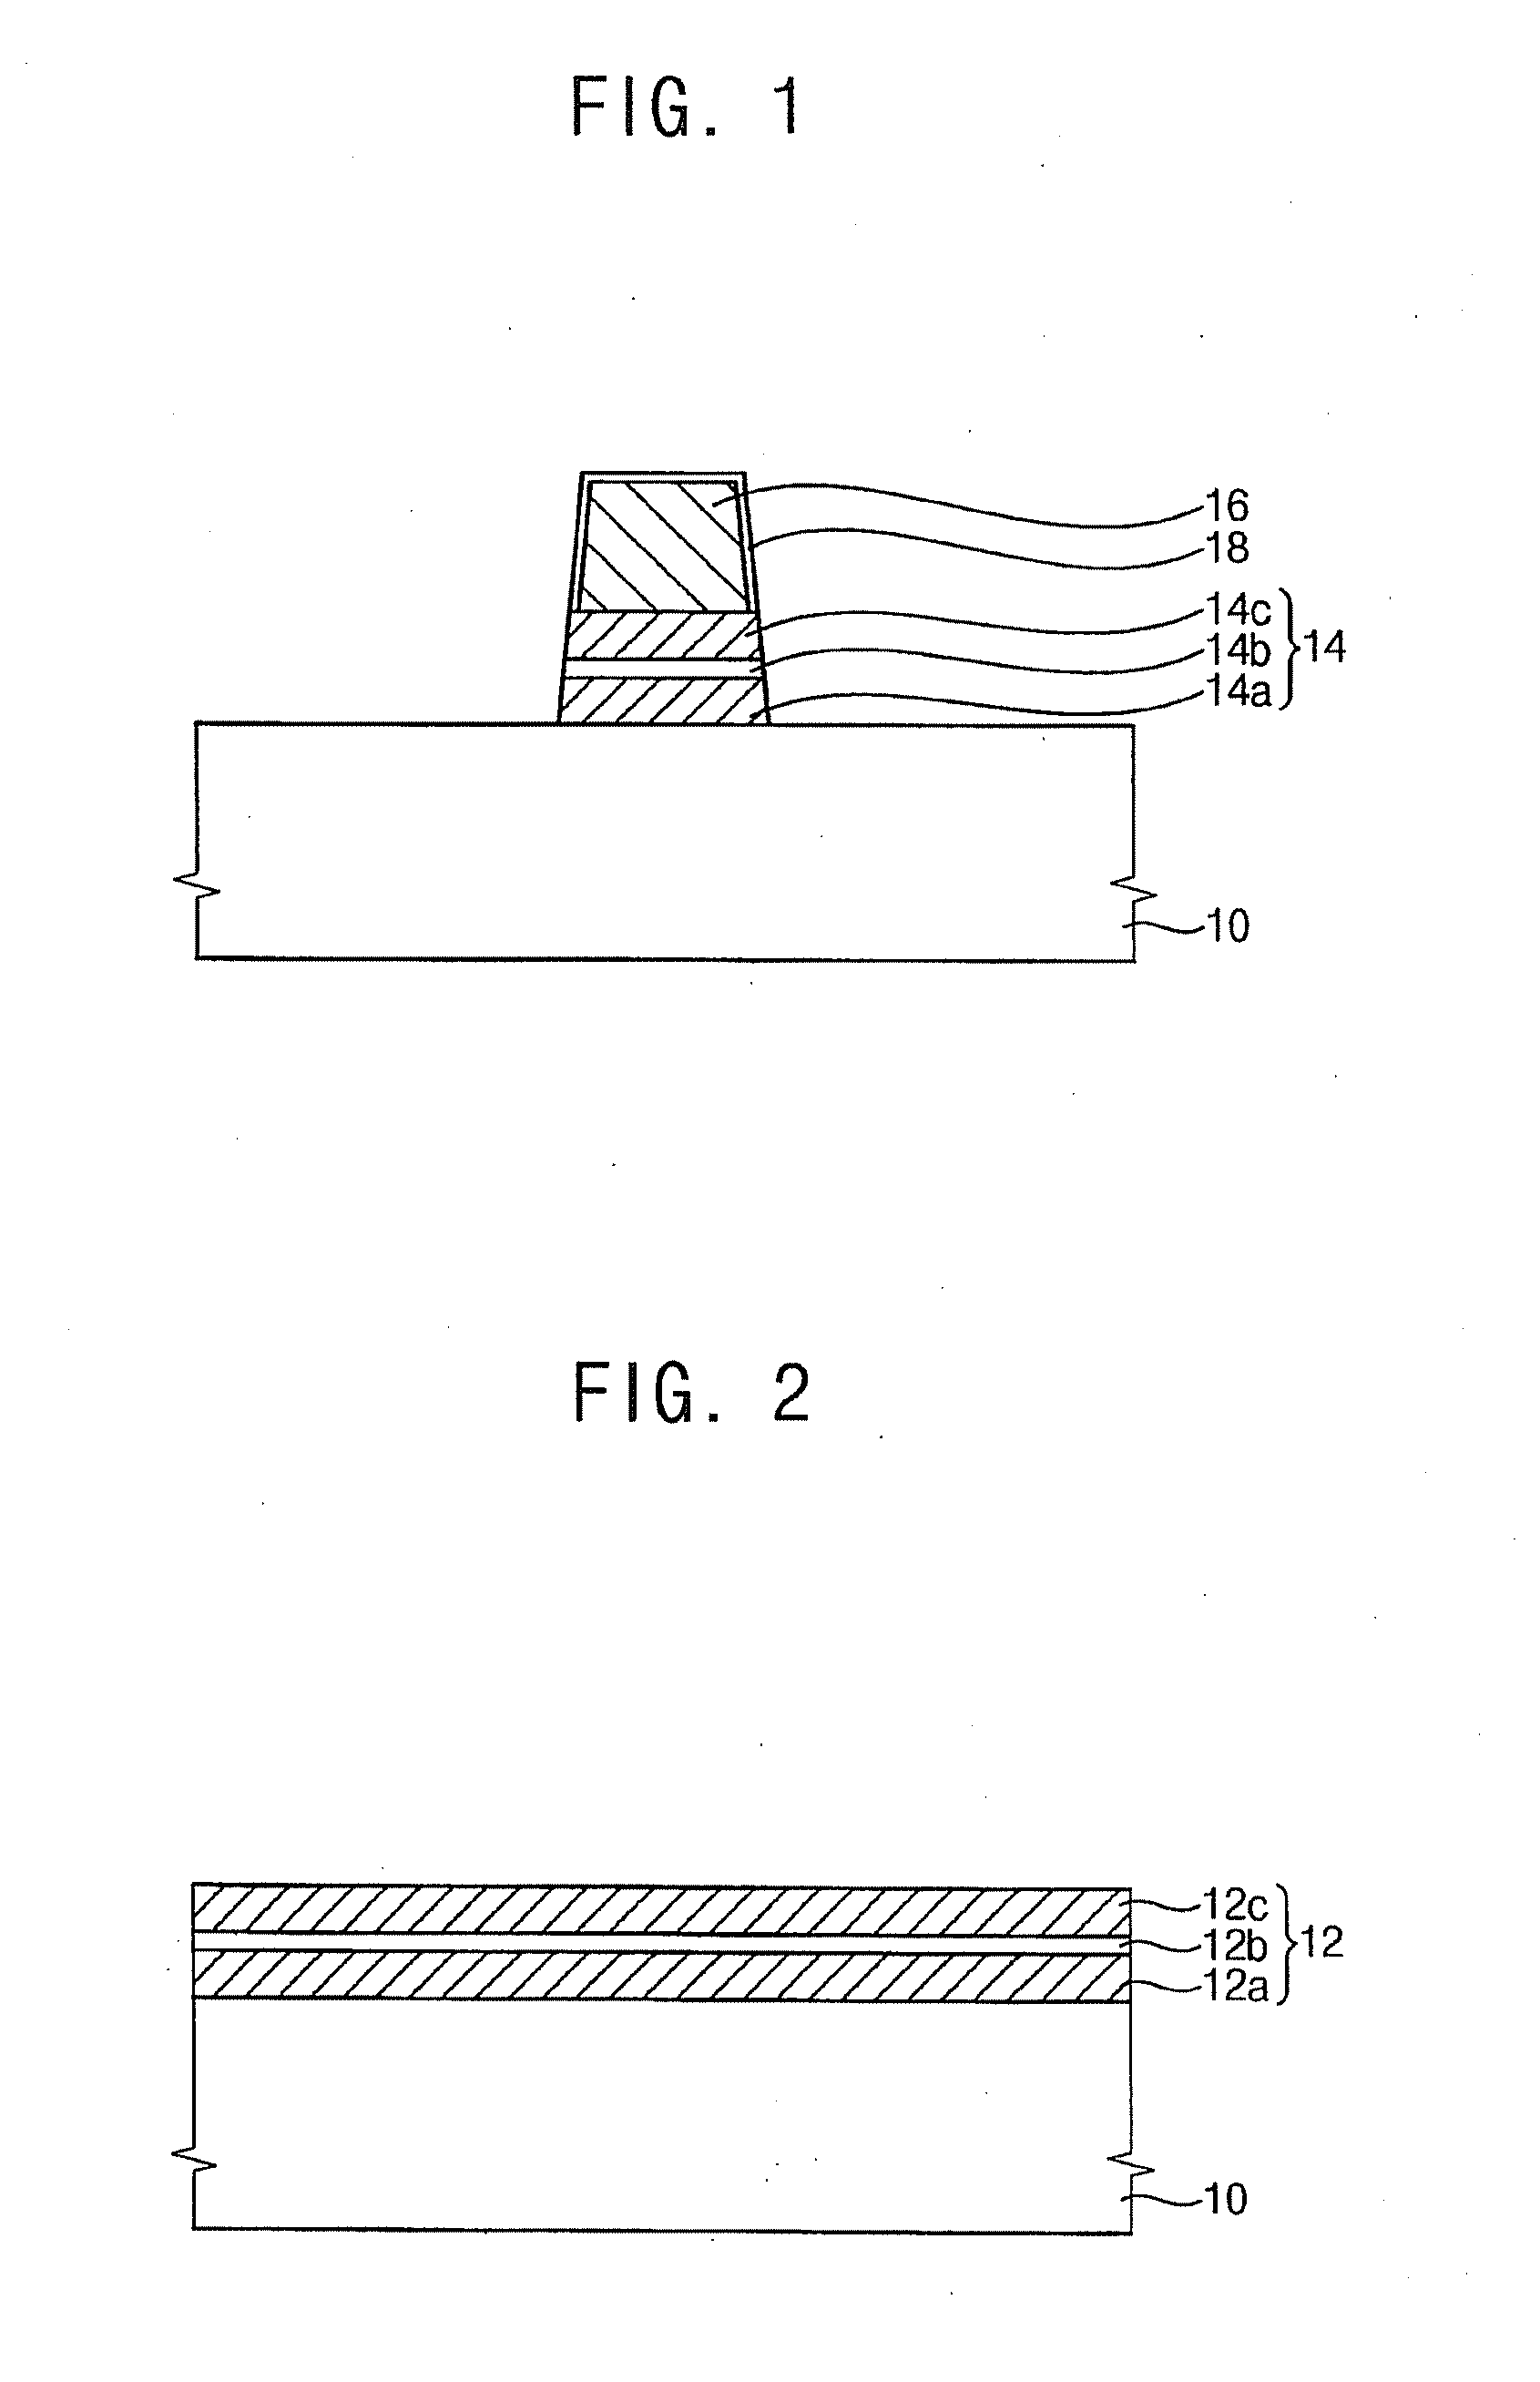 Methods of forming pattern structures